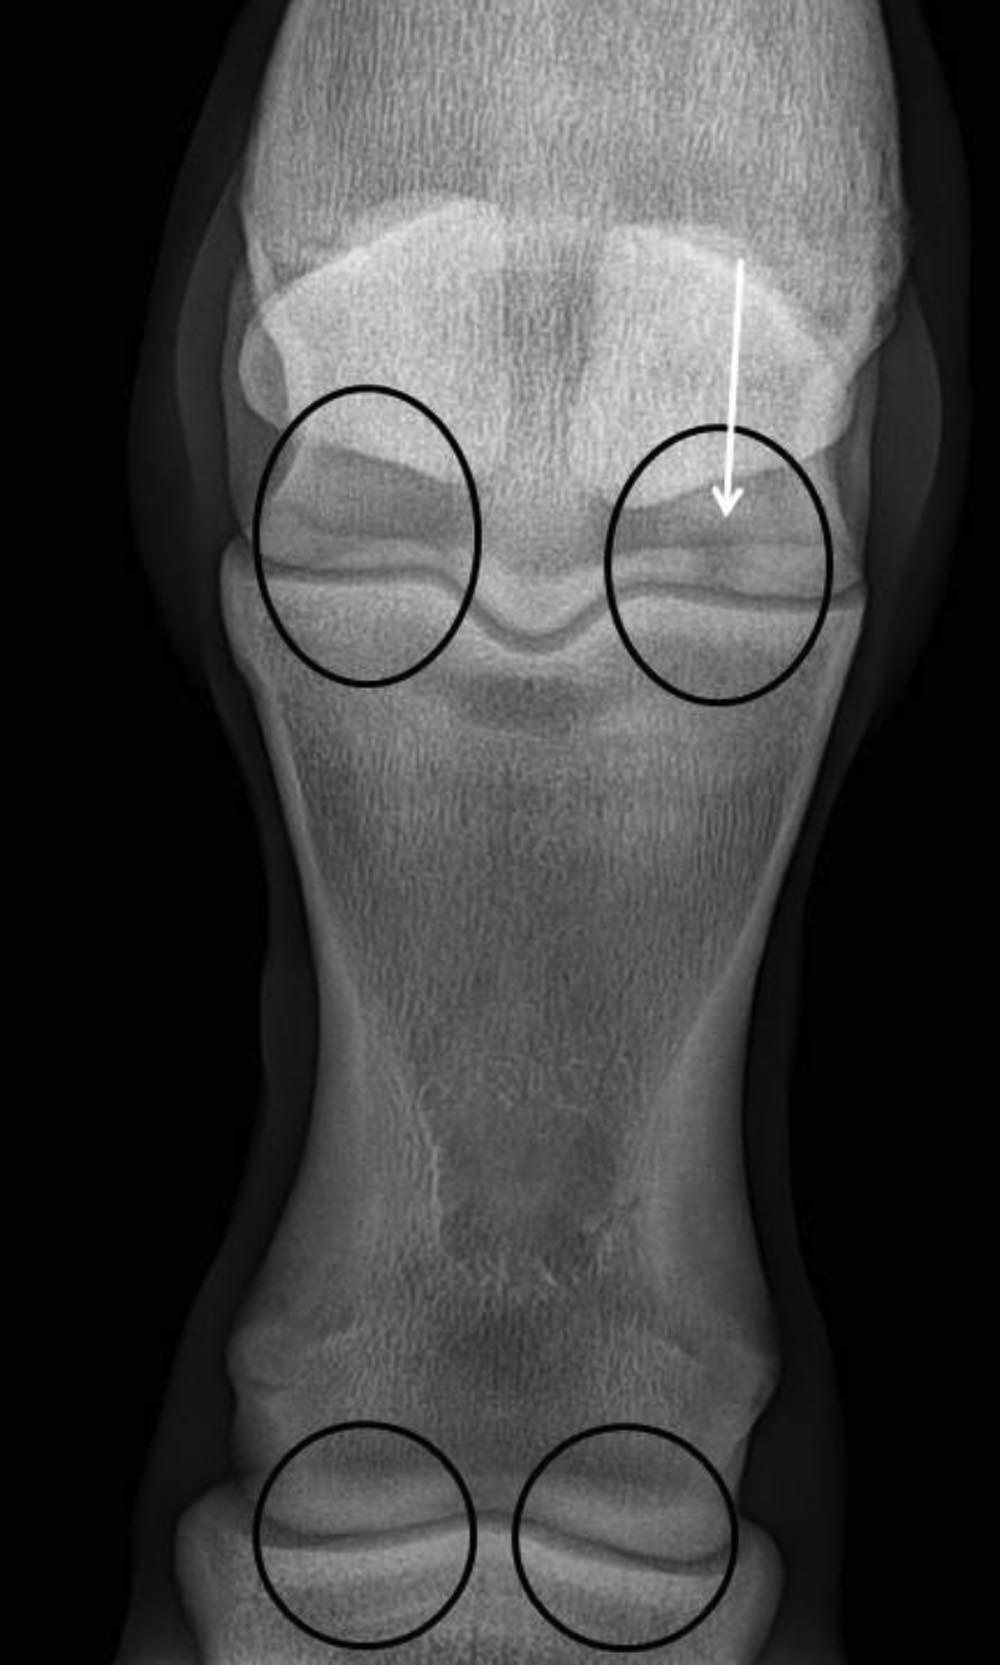 Fig. 2. Fetlock joint lateral to medial projection. This horse has moderate (3- to 4-mm) supracondylar lysis of the distal metacarpus (arrow). This radiograph will be discussed by the panel as Case 2.